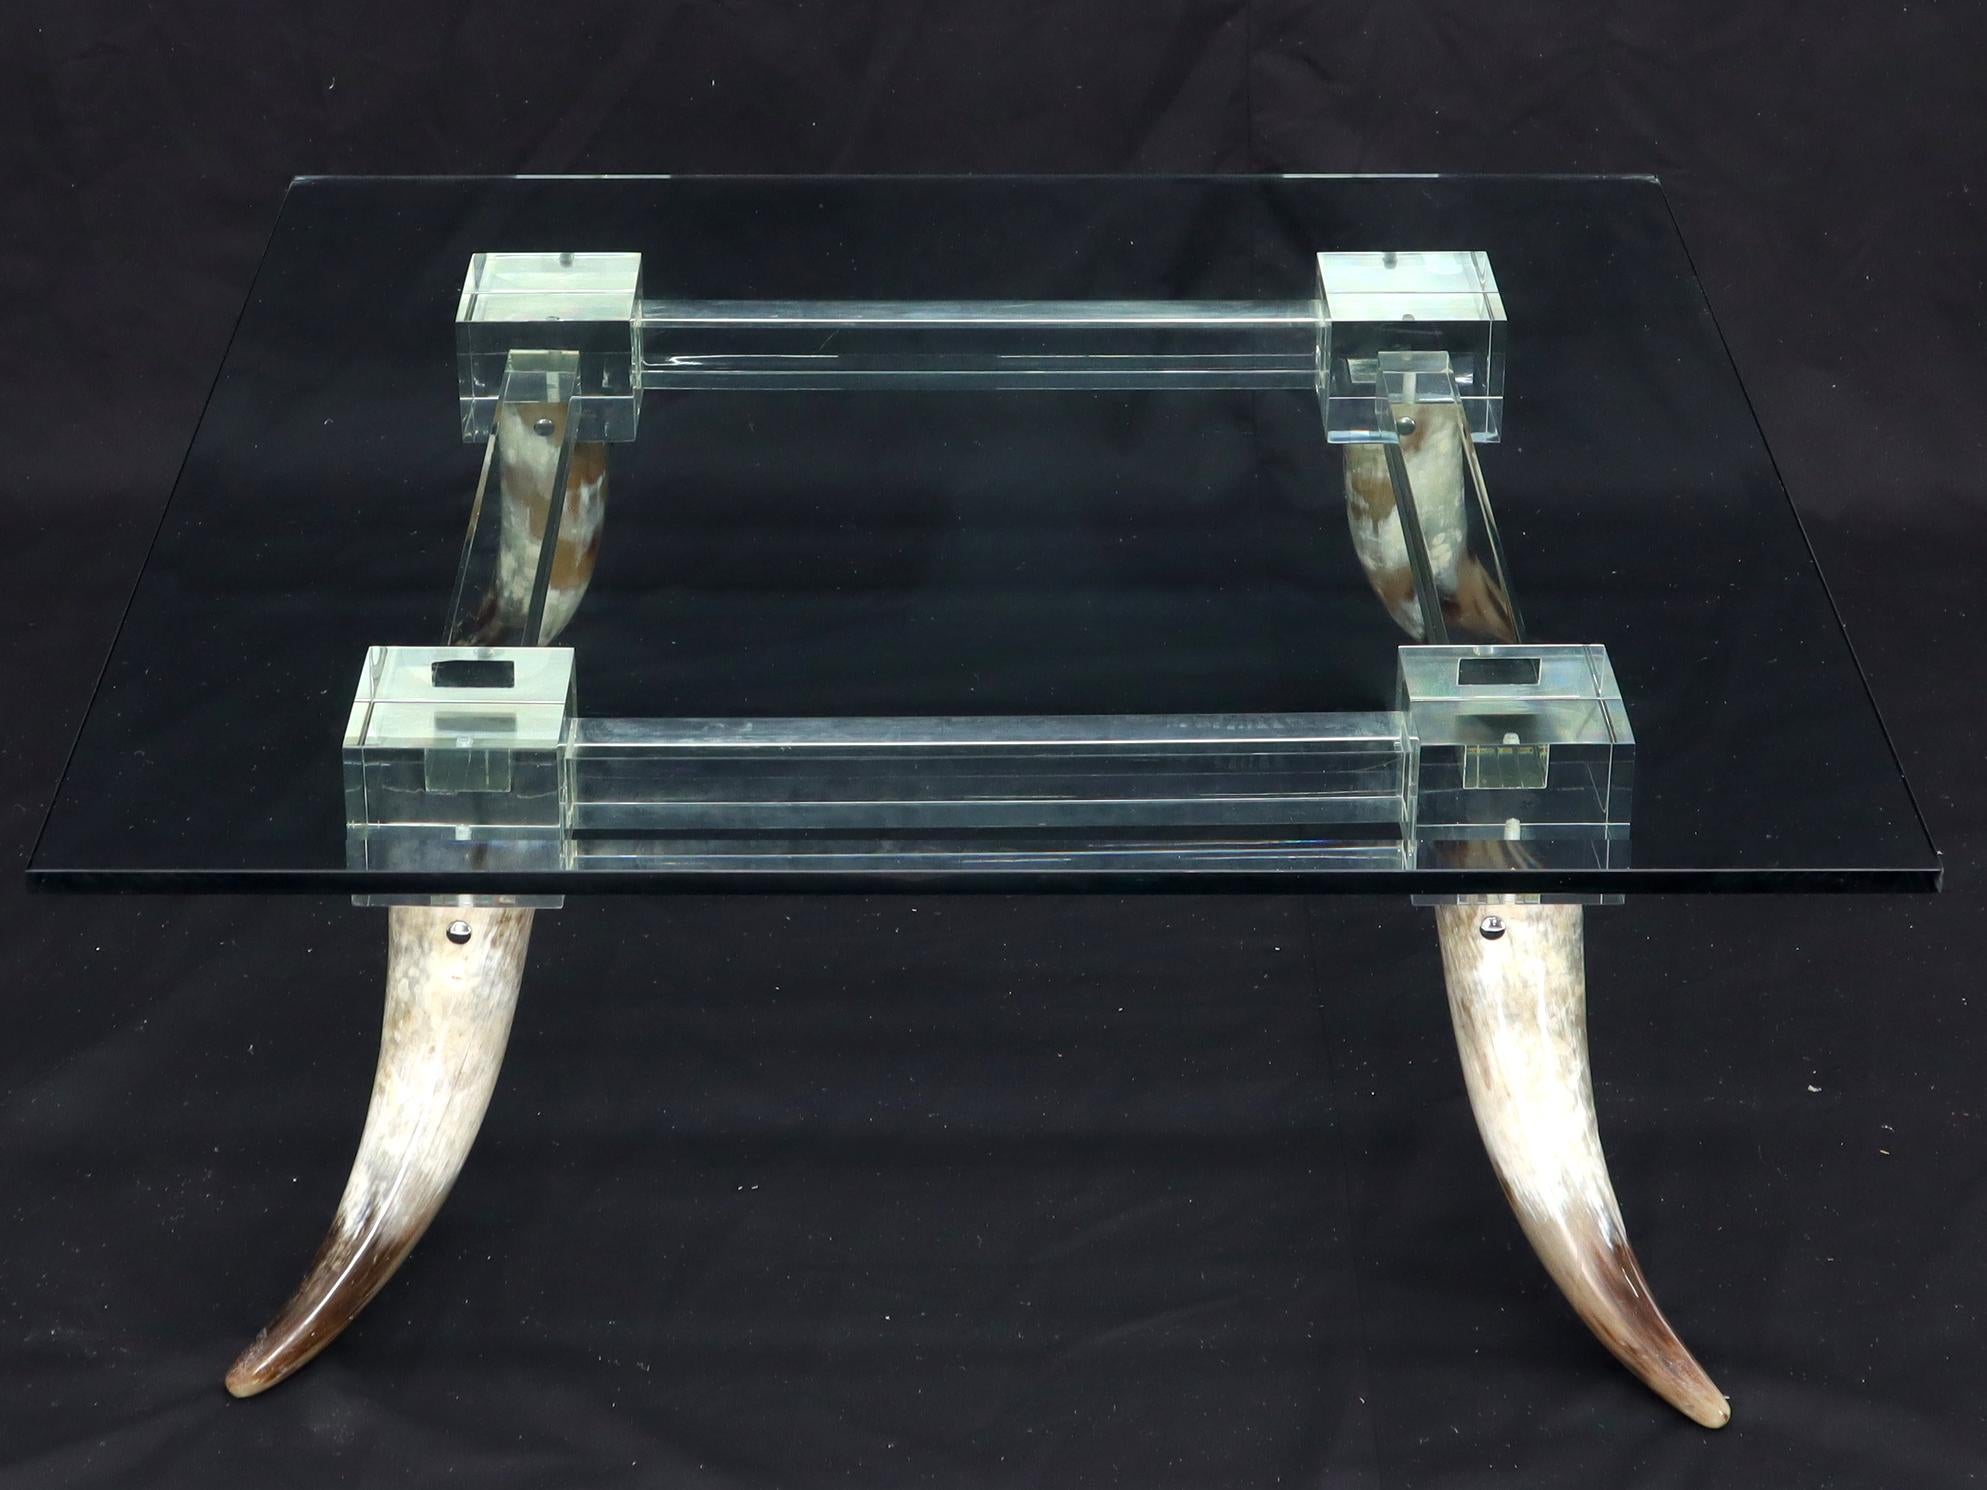 Bull Horns Shaped to Legs Lucite Stretchers Base Square Glass Top Couchtisch (amerikanisch) im Angebot